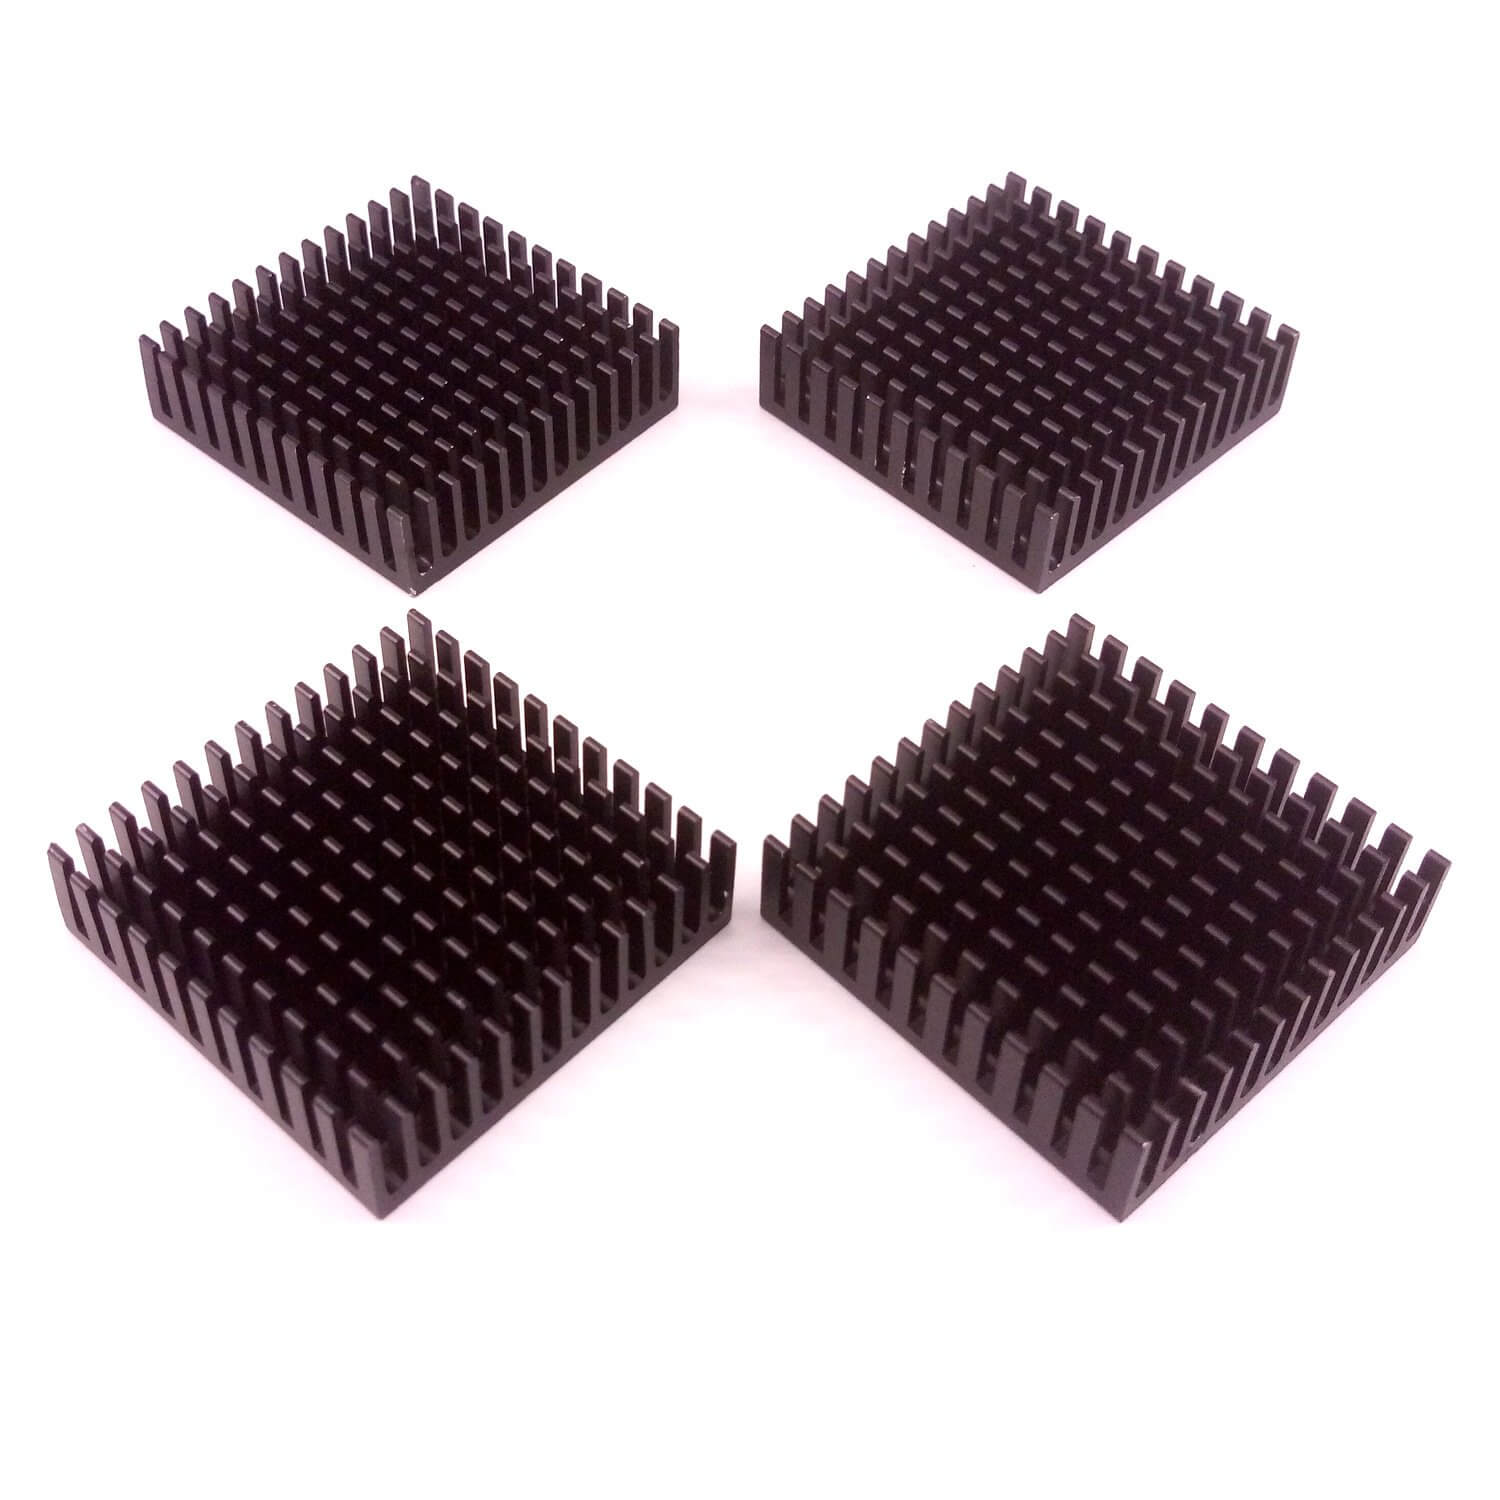 4pcs 40mm Heatsink Kit 40x40x11mm 3m 8810 Thermal Conductive Adhesive Tape Cooler Heat Sink For Cooling 3d Printers Tec1 12706 Thermoelectric